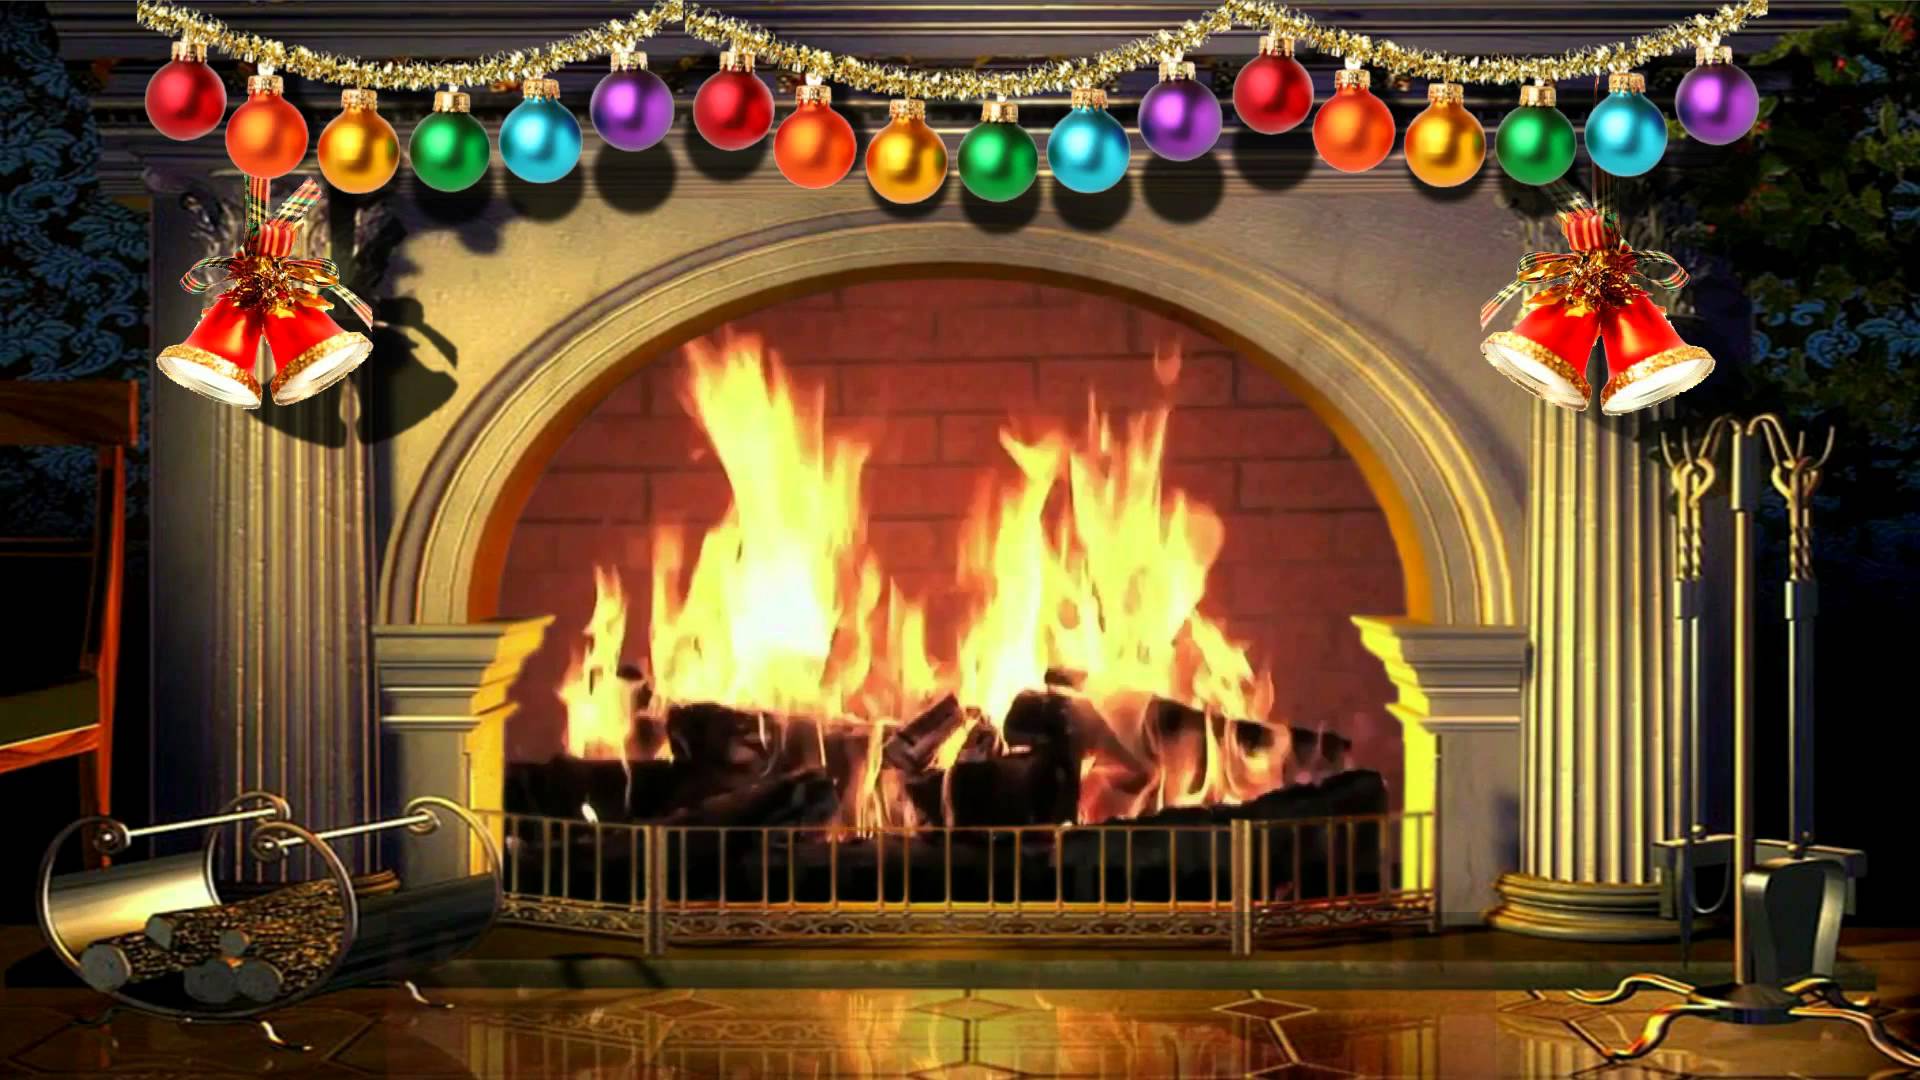 Virtual Christmas Fireplace Background Video 1080p HD Minute